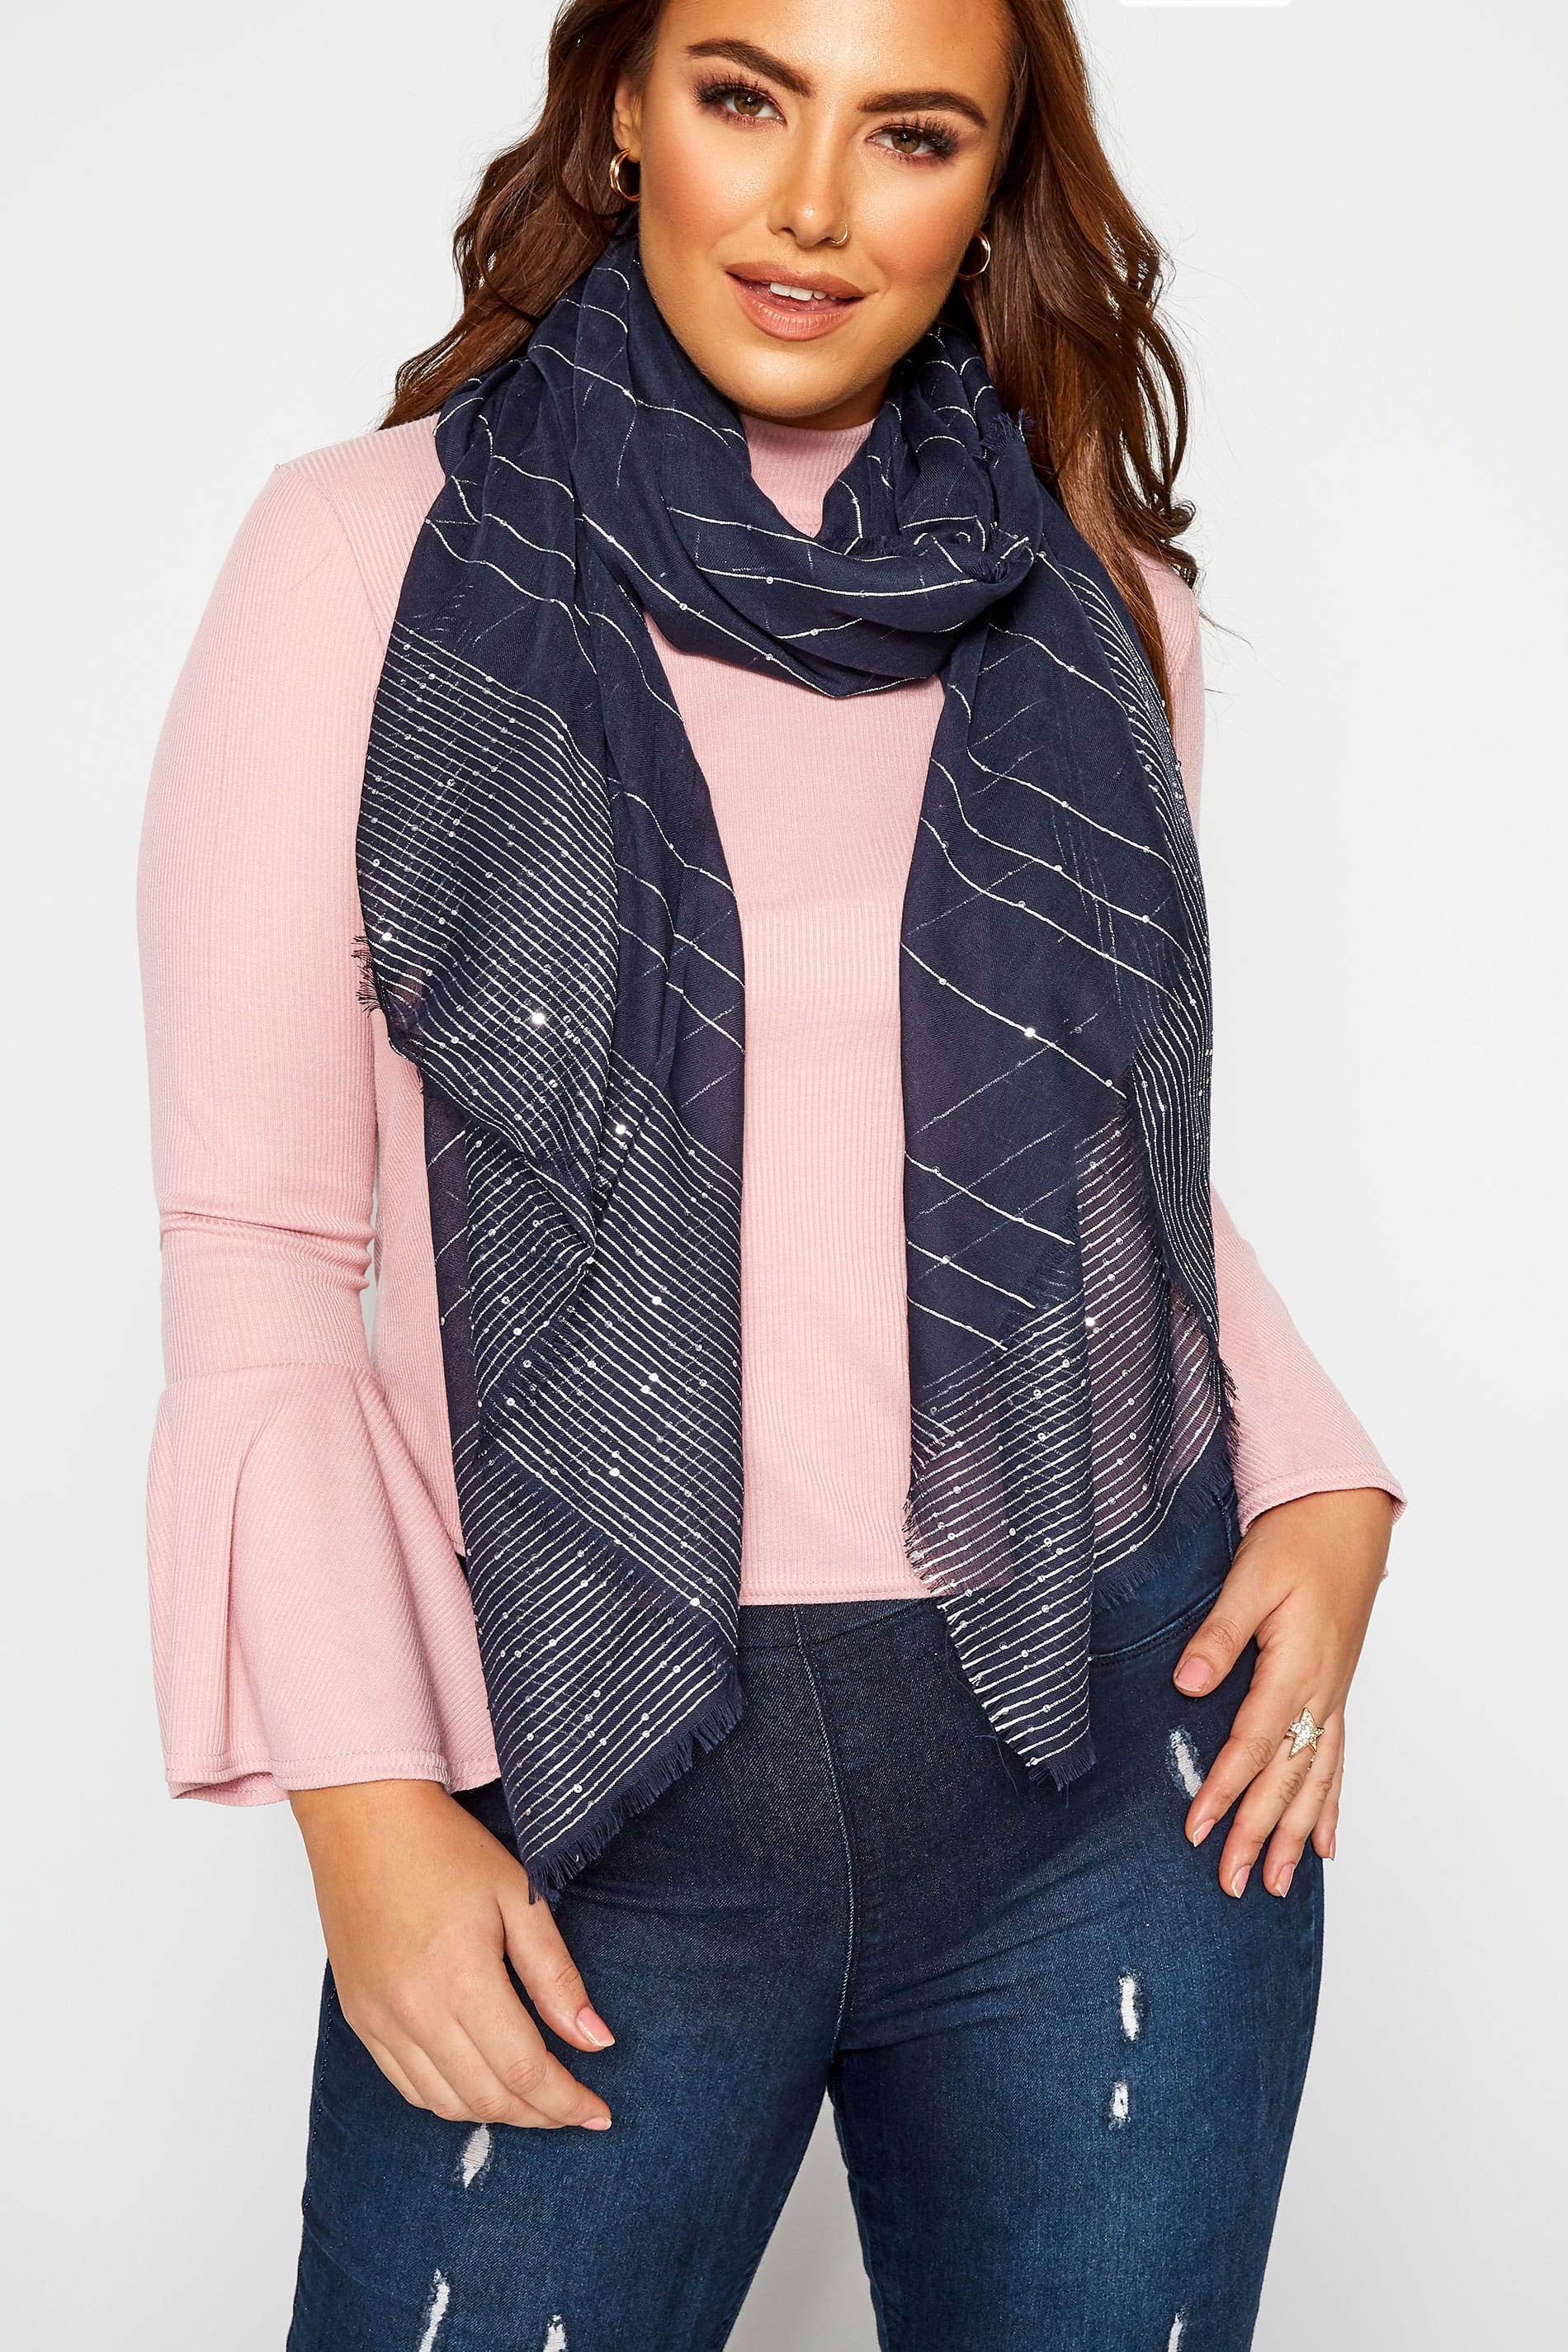 navy and silver scarf